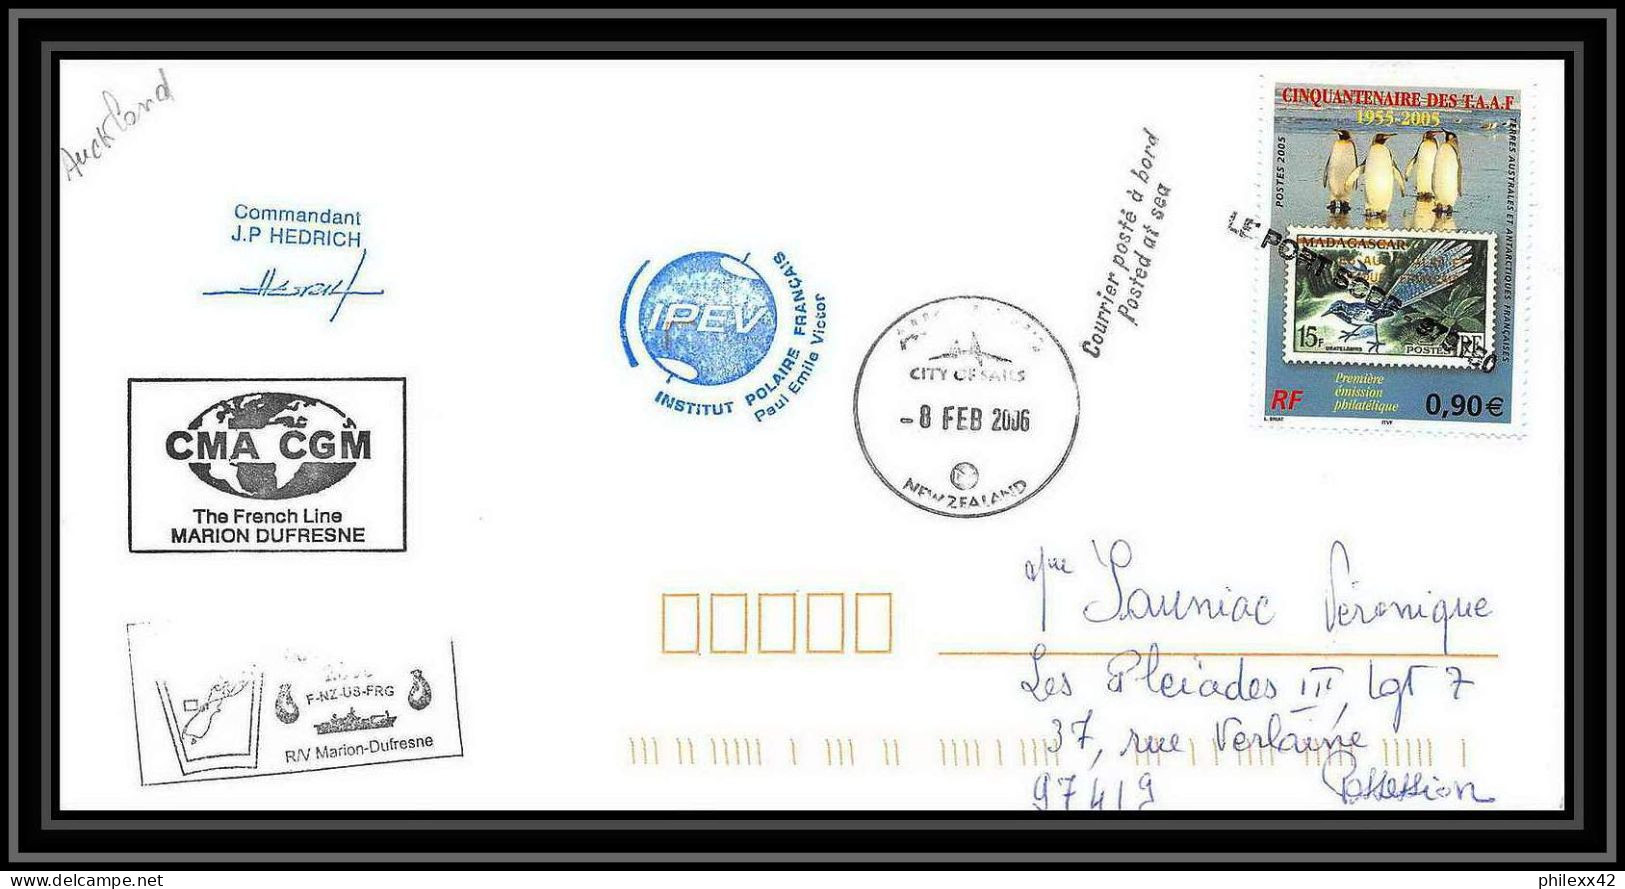 2562 ANTARCTIC NEW ZELAN AUCKLAND-Lettre Cover Dufresne 2 Signé Signed 8/2/2006 N°430 Obl Griffe - Antarctic Expeditions